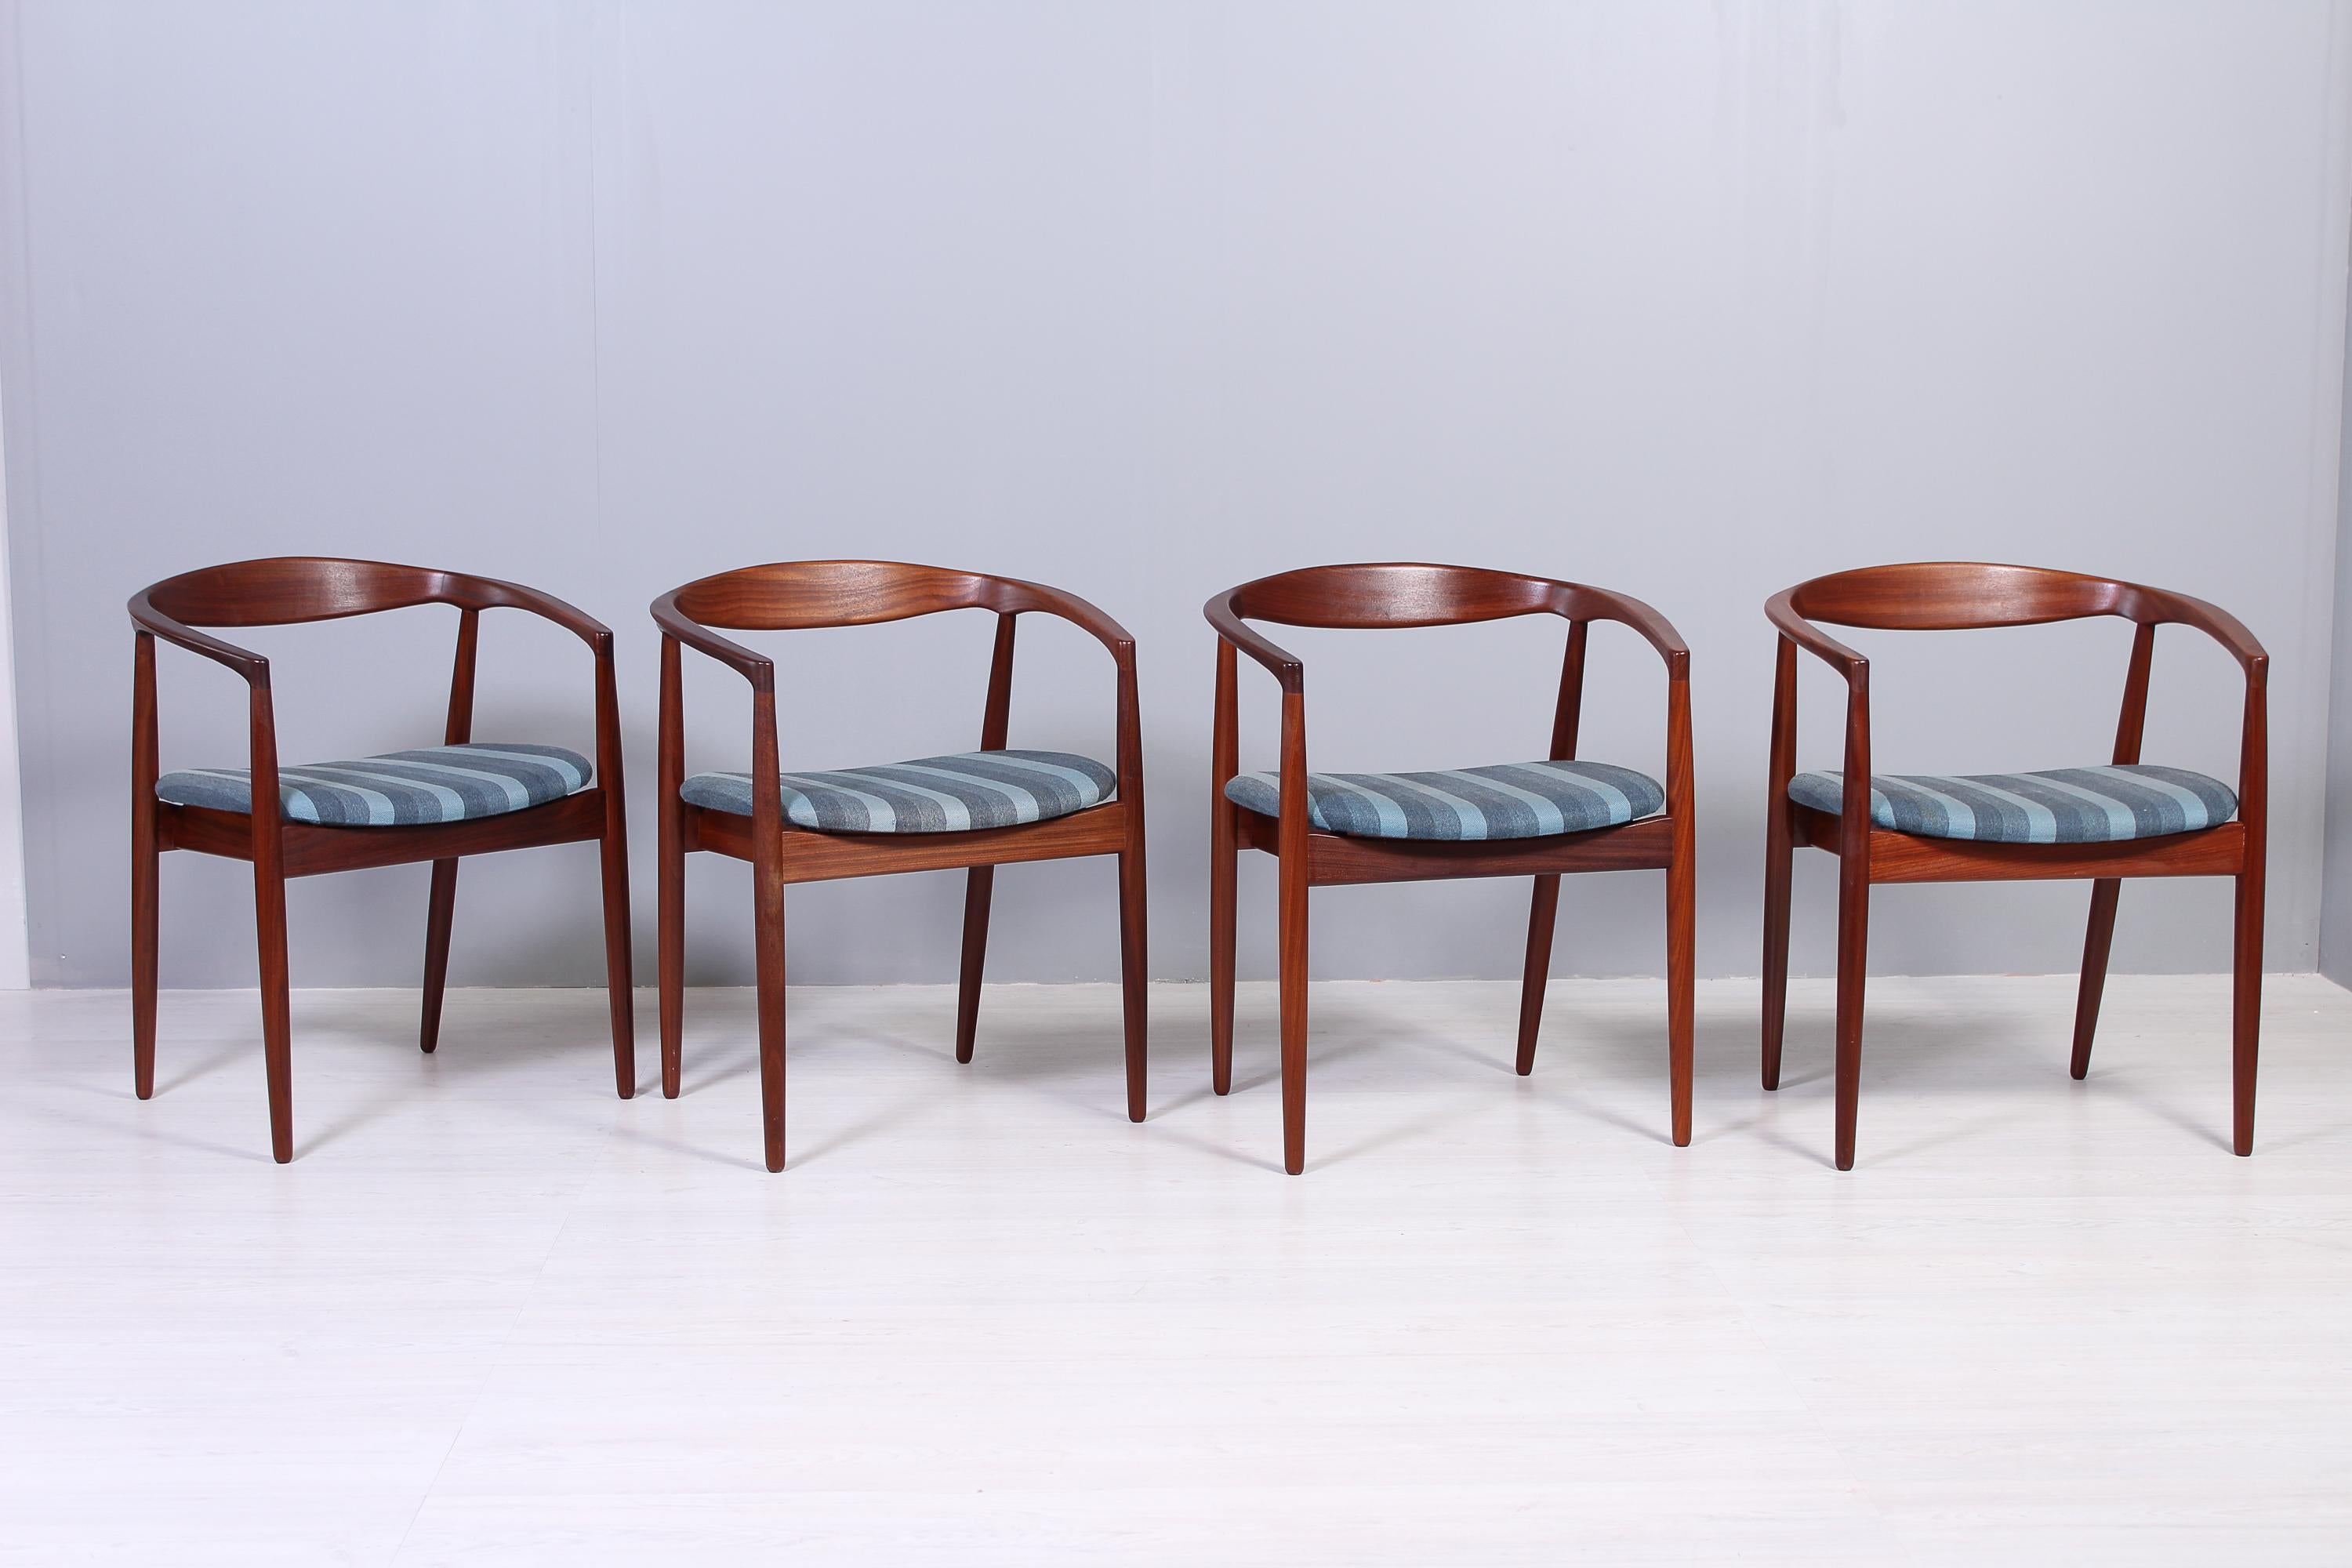 A set of four Kai Kristiansen teak chairs of the model Troja. The chairs have their original wool upholstery. Very good vintage condition on frames with only small signs of usage. Fabric with small signs of usage and wear consistent with age. We can